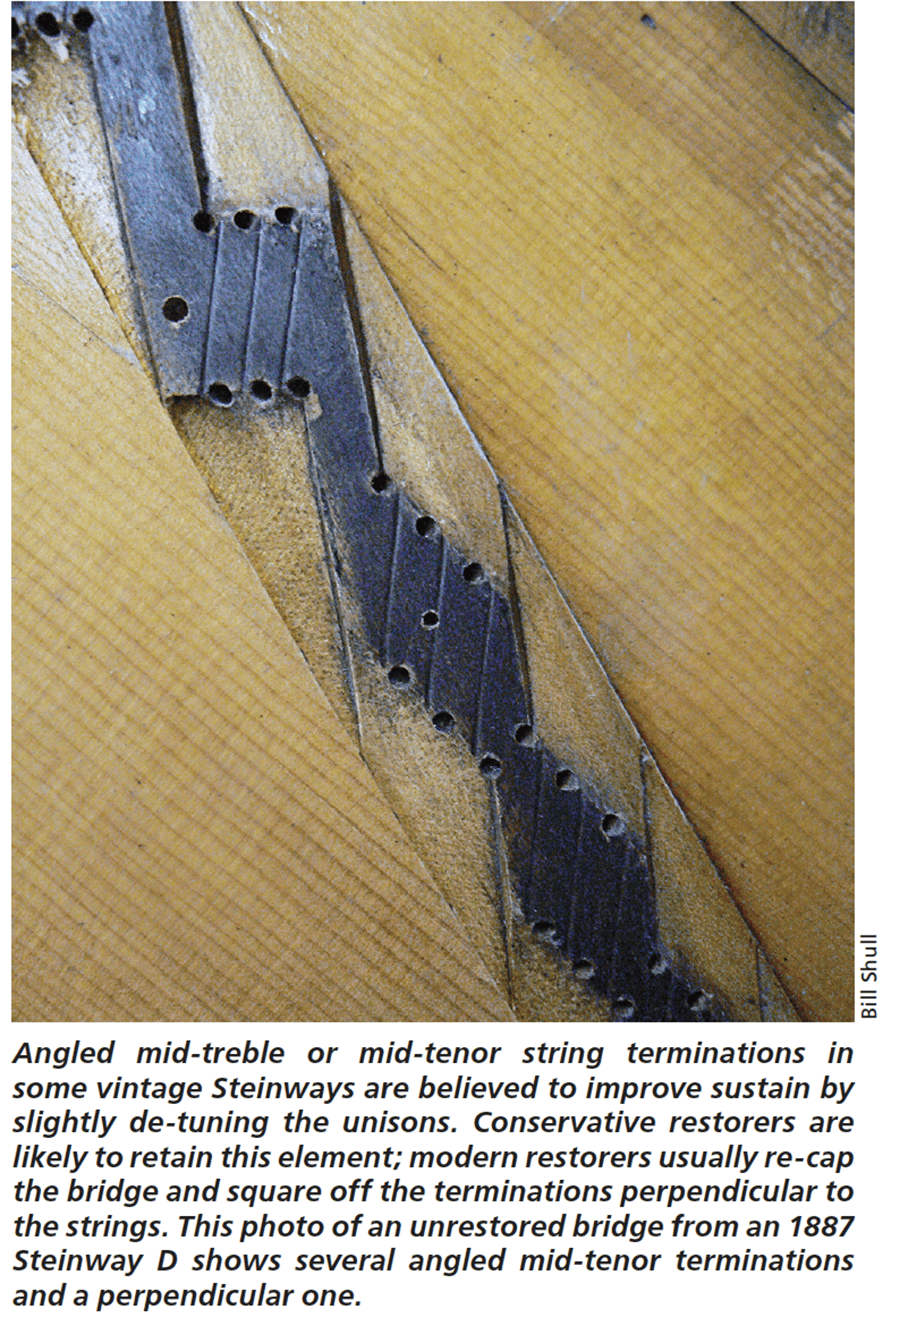 Angled mid-treble or mid-tenor string terminations in some vintage Steinways are believed to improve sustain by slightly de-tuning the unisons. Conservative restorers are likely to retain this element; modern restorers usually re-cap the bridge and square off the terminations perpendicular to the strings. This photo of an unrestored bridge from an 1887 Steinway D shows several angled mid-tenor terminations and a perpendicular one. Source: Bill Shull.